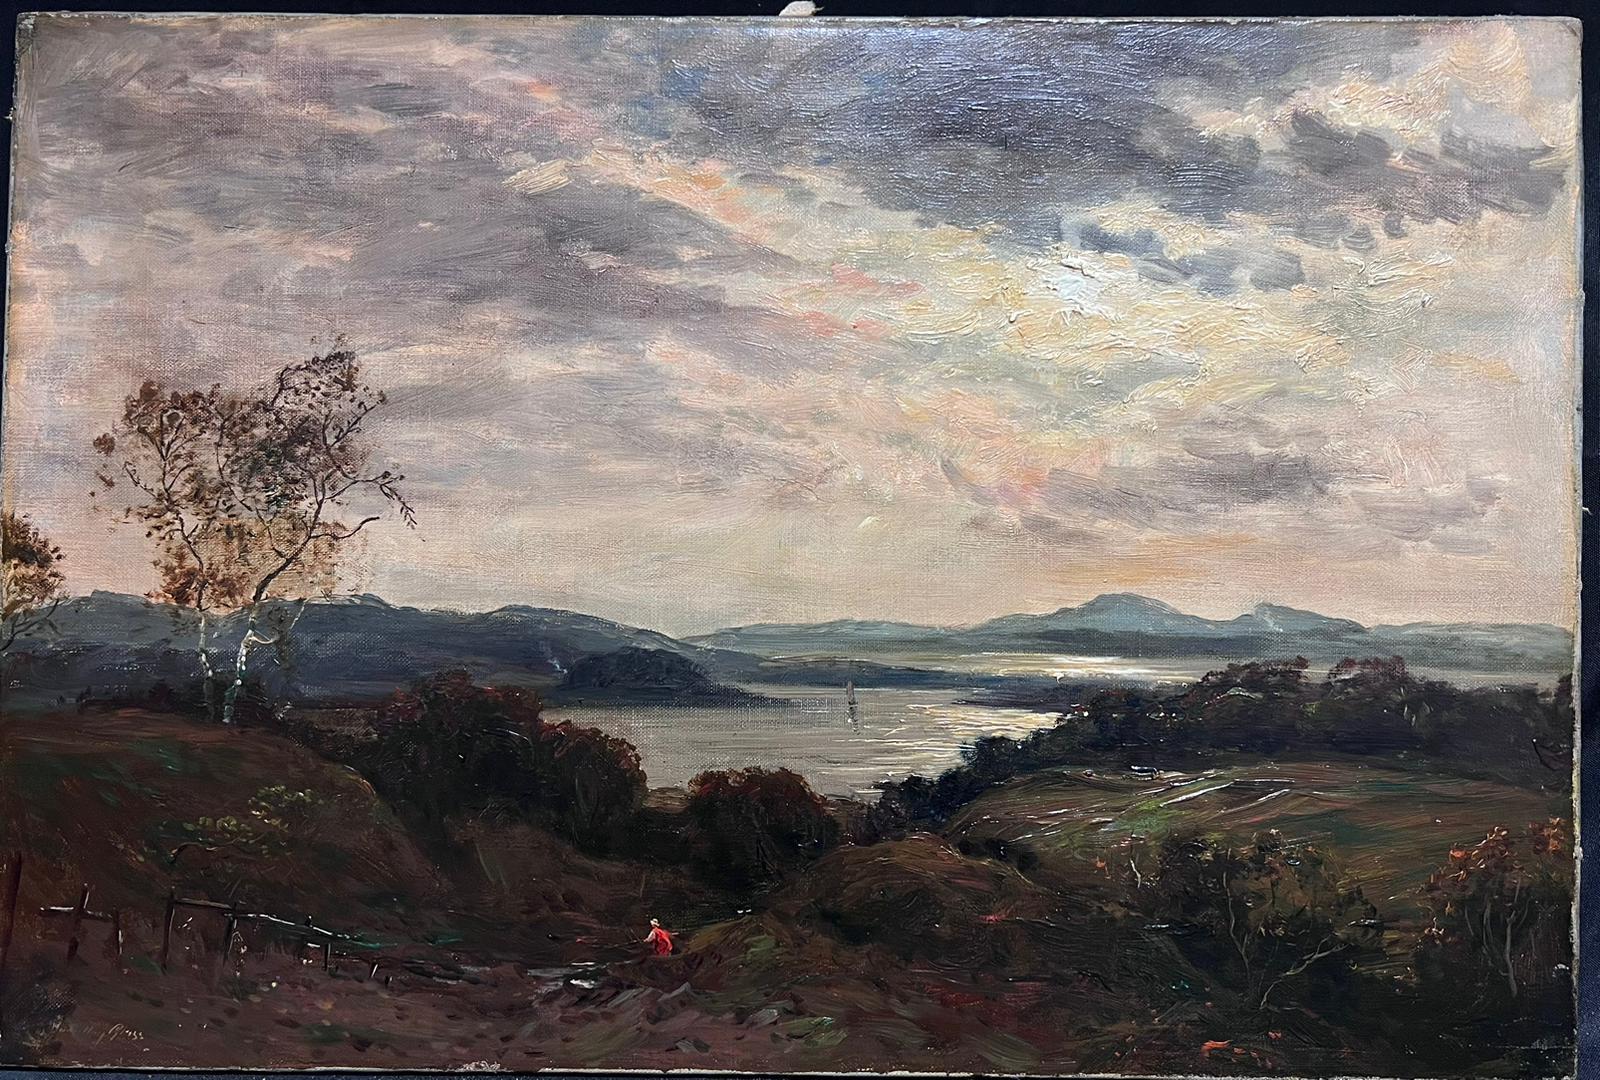 Benderloch, Argyllshire
by John Hamilton Glass (British, fl.1890-1925)
signed 
oil on canvas, unframed
canvas: 16 x 24 inches
inscribed verso
provenance: private collection, England
condition: overall good and sound condition 